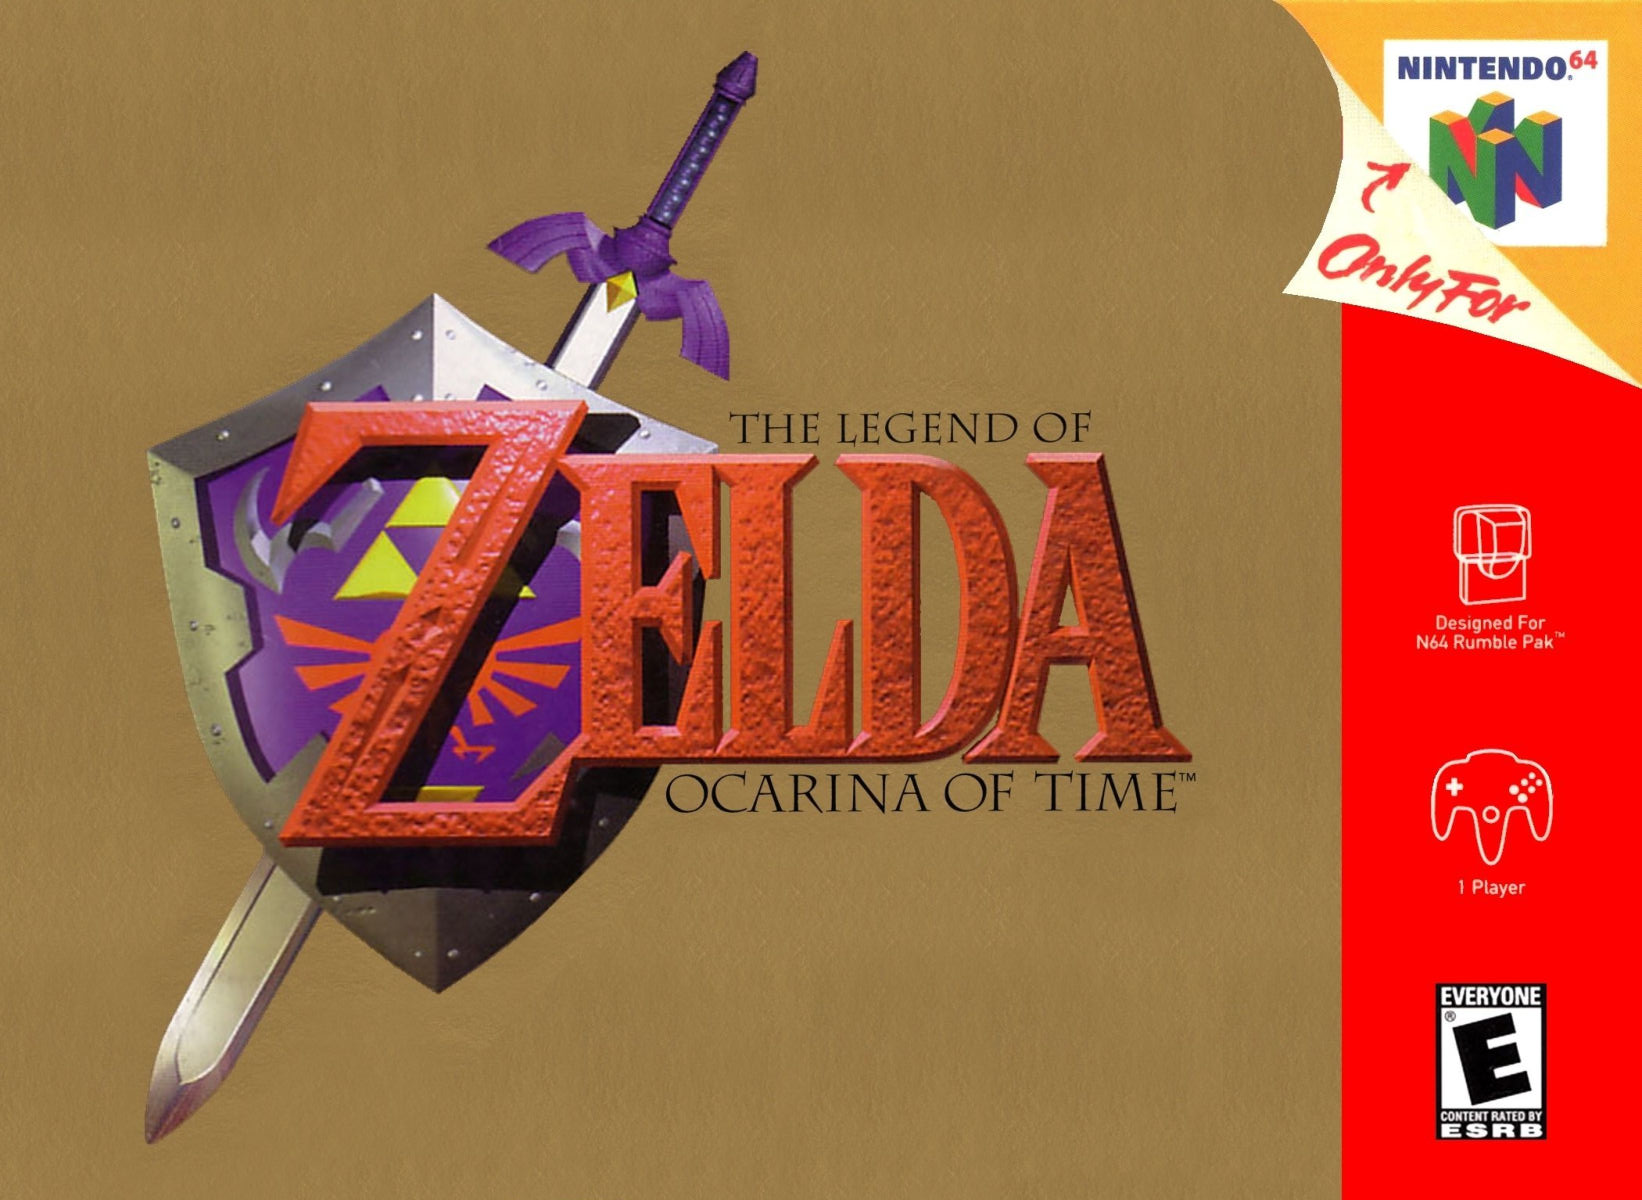 The Legend of Zelda Ocarina of Time (Collector's Edition)